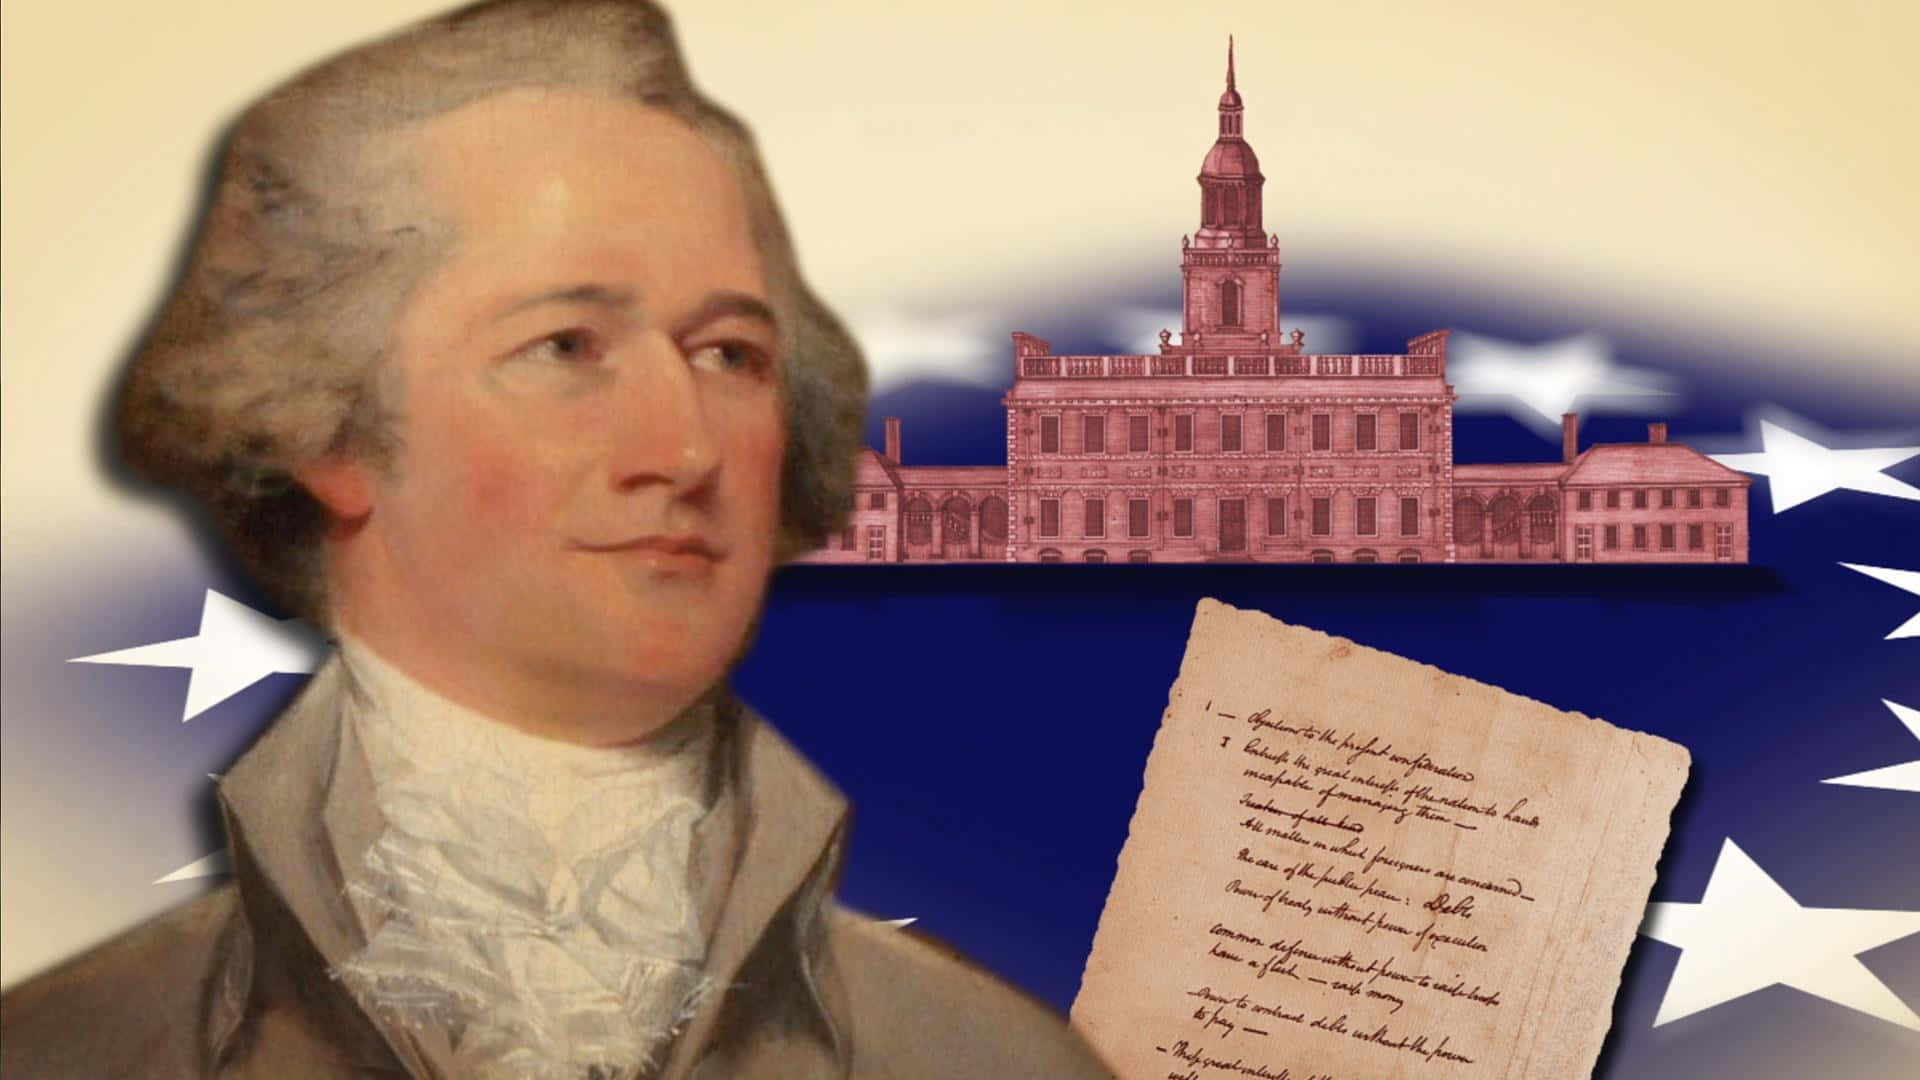 Alexander Hamilton: Founding Father of the United States